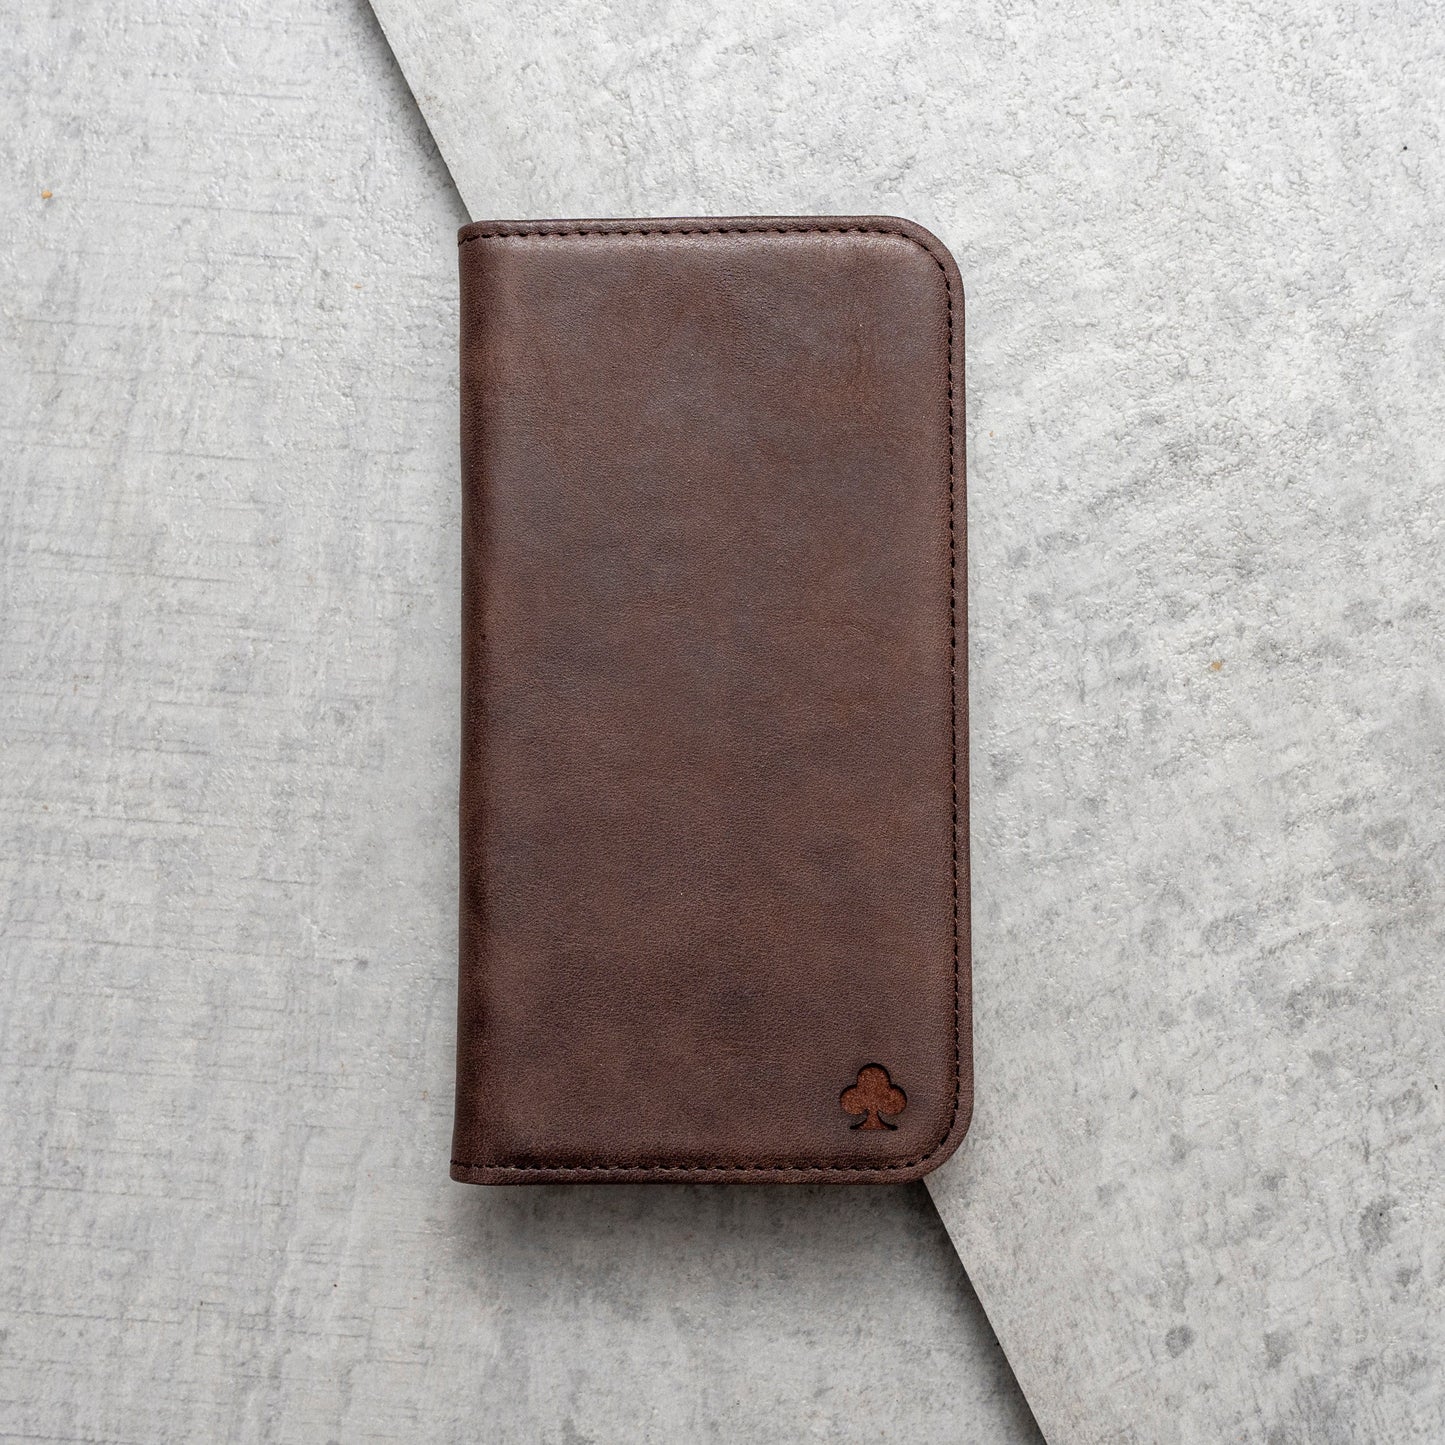 Huawei P30 Pro Leather Case. Premium Slim Genuine Leather Stand Case/Cover/Wallet (Chocolate Brown)